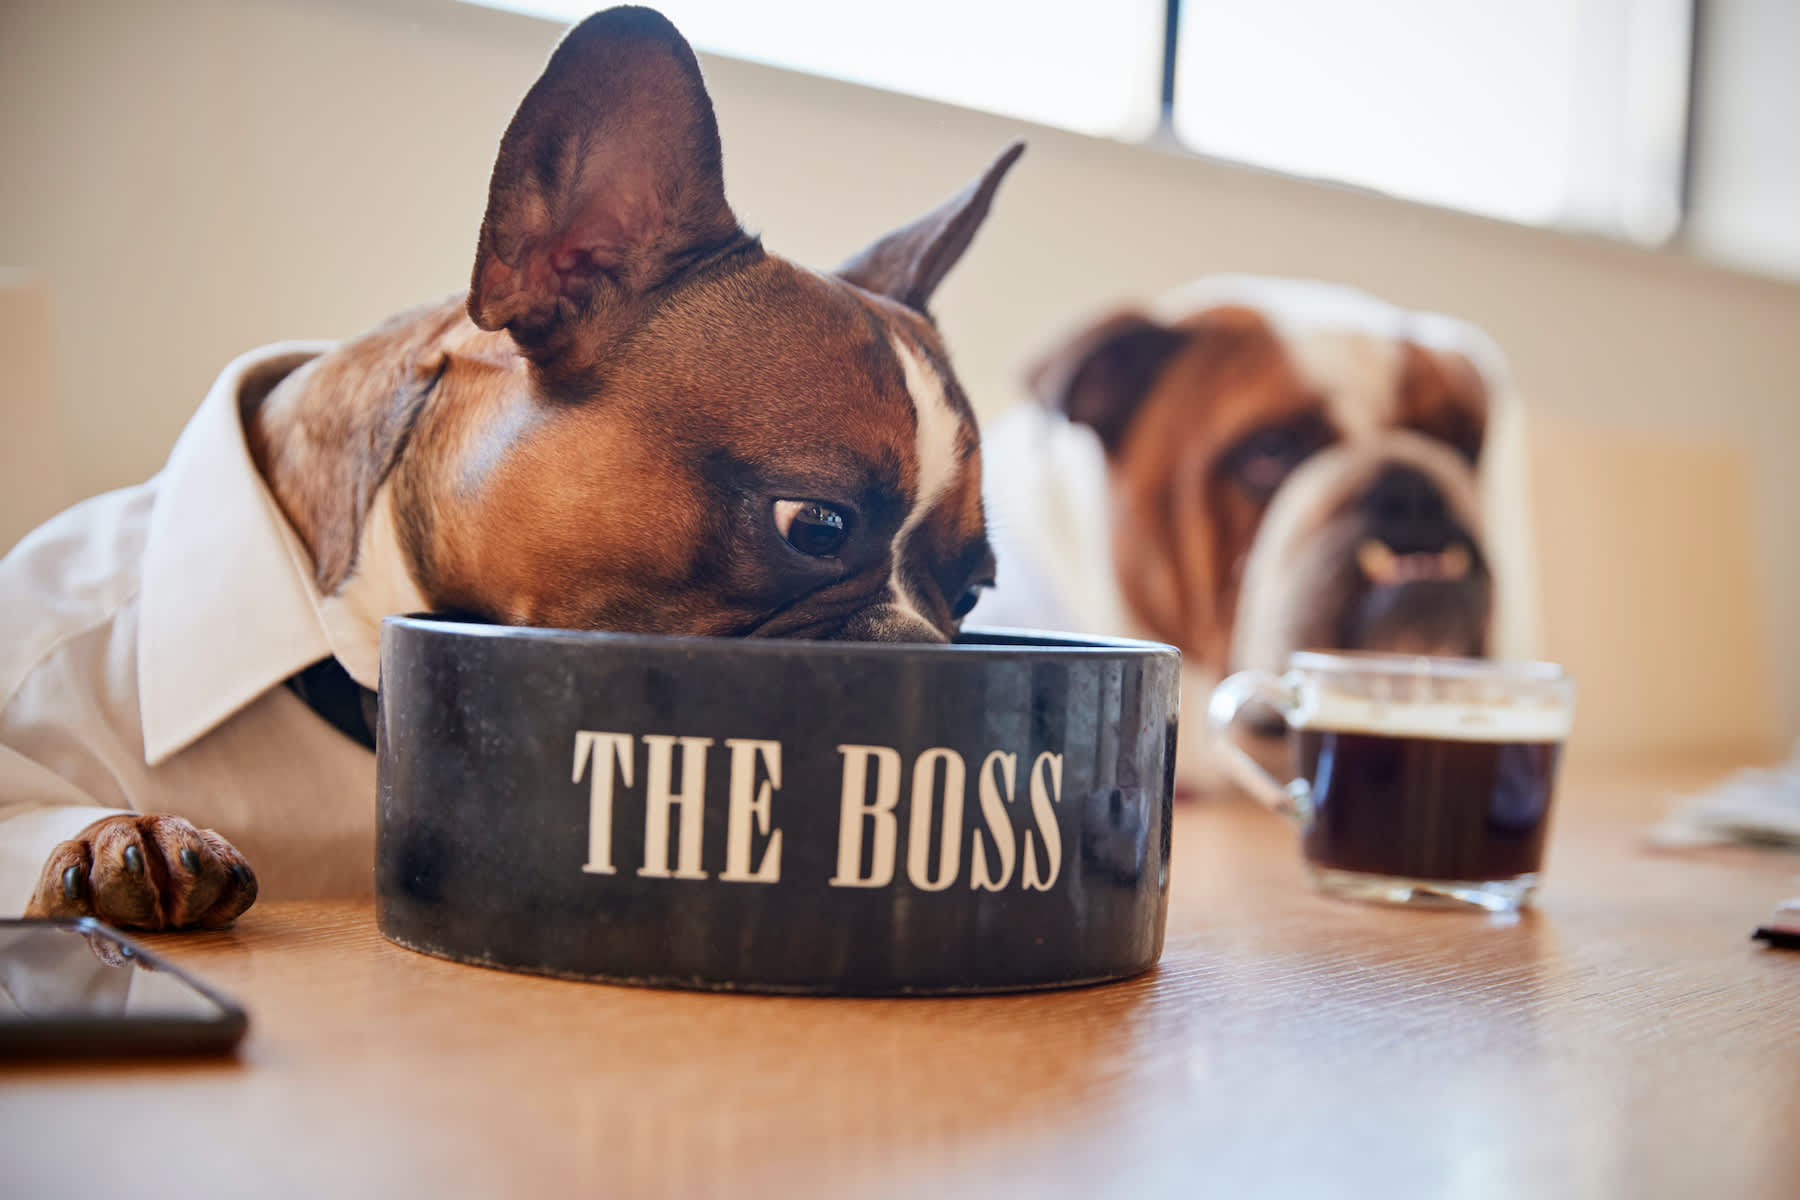 Canva - Dog Dressed as Businessmen Eating from Bowl Labelled the Boss